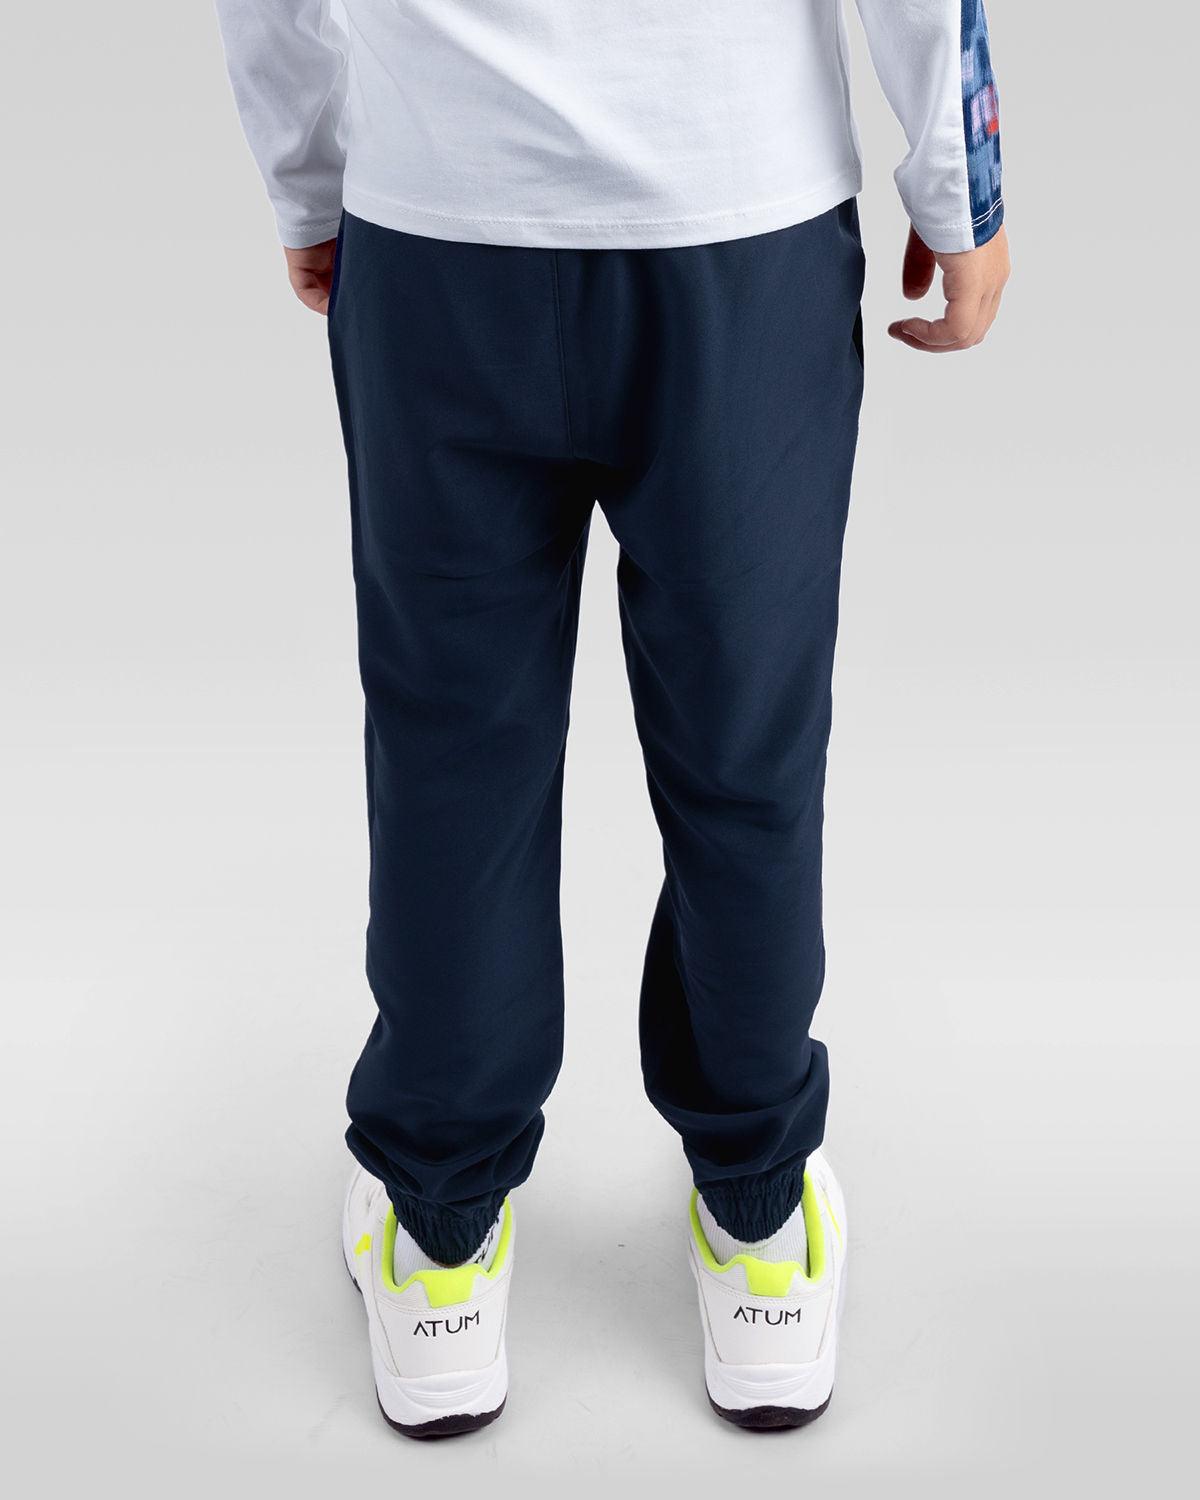 Photo by 𝗔𝗧𝗨𝗠 SPORTSWEAR ® on December 20, 2022. May be an image of 1 boy wears a navy sweatpants and a white shoes.